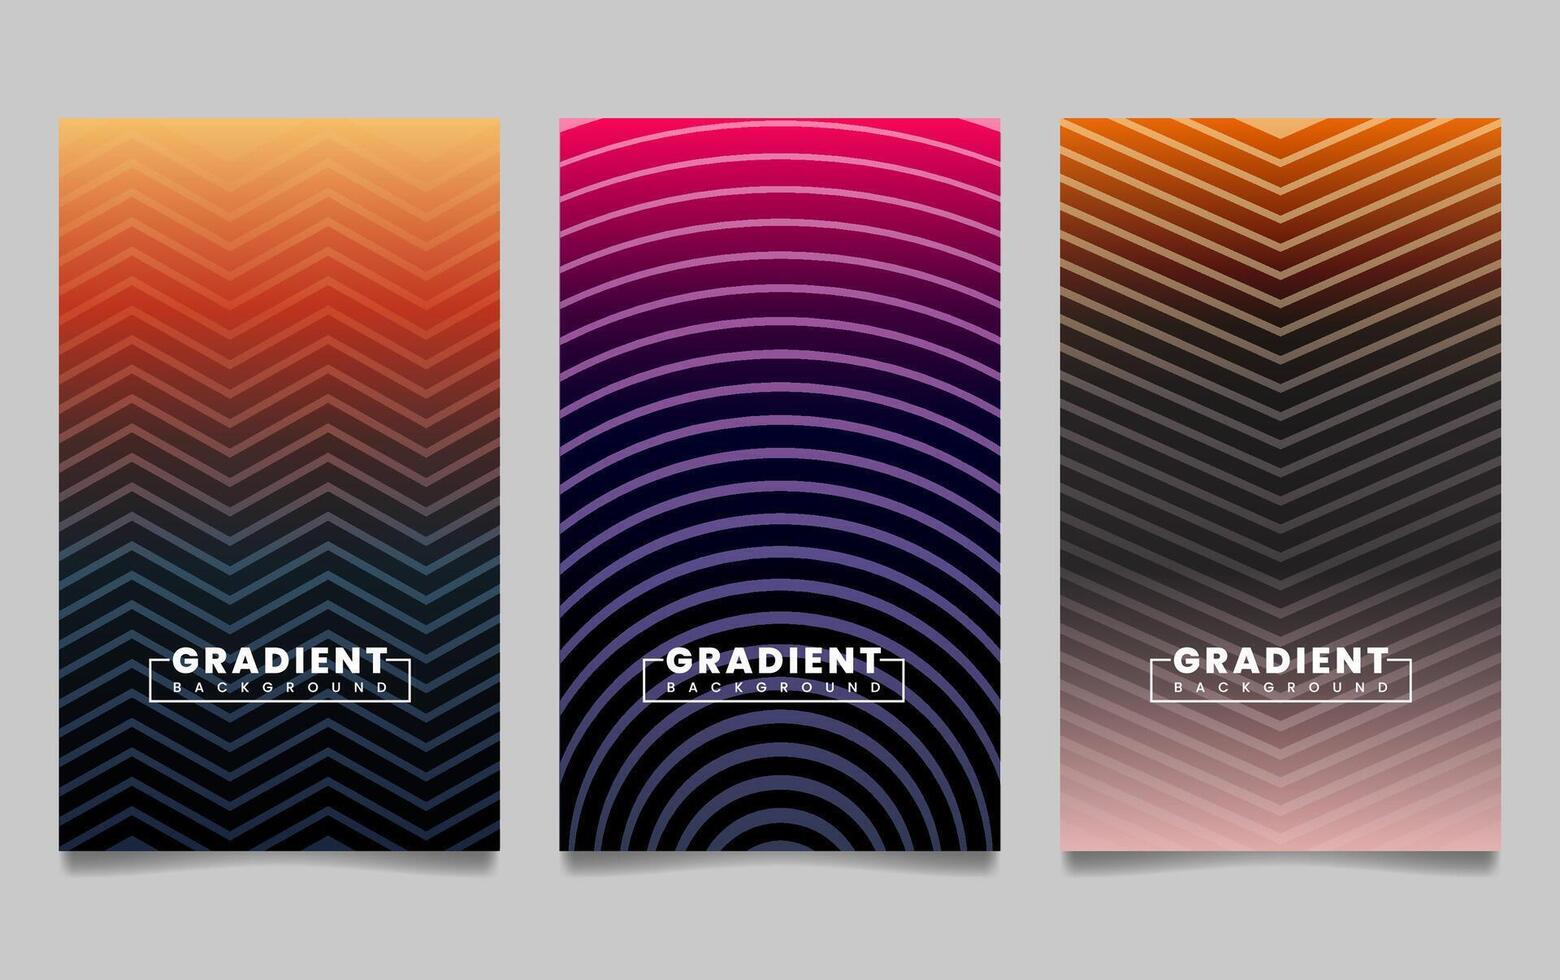 gradient backgrounds with line texture. For covers, wallpapers, branding, business cards, social media and other projects. vector